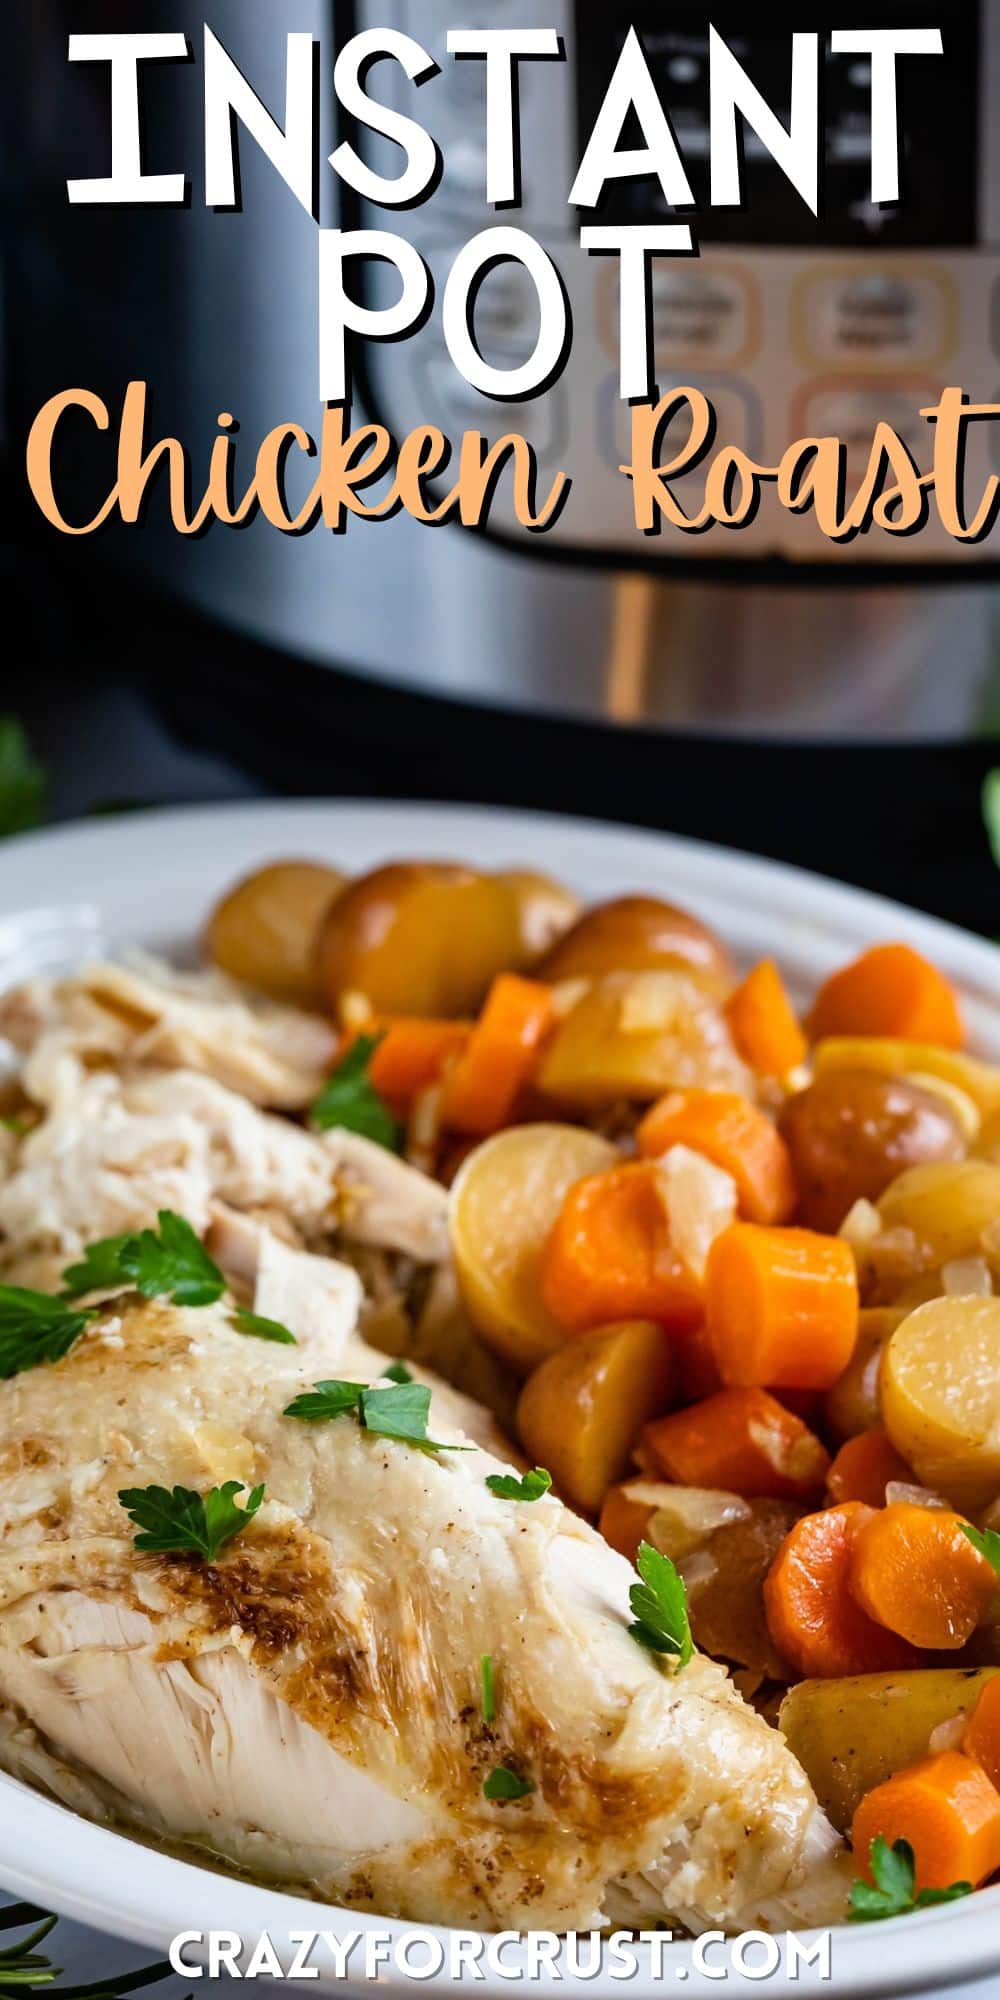 chicken and carrots and potatoes in a white bowl with an instant pot in the back with words on the image.